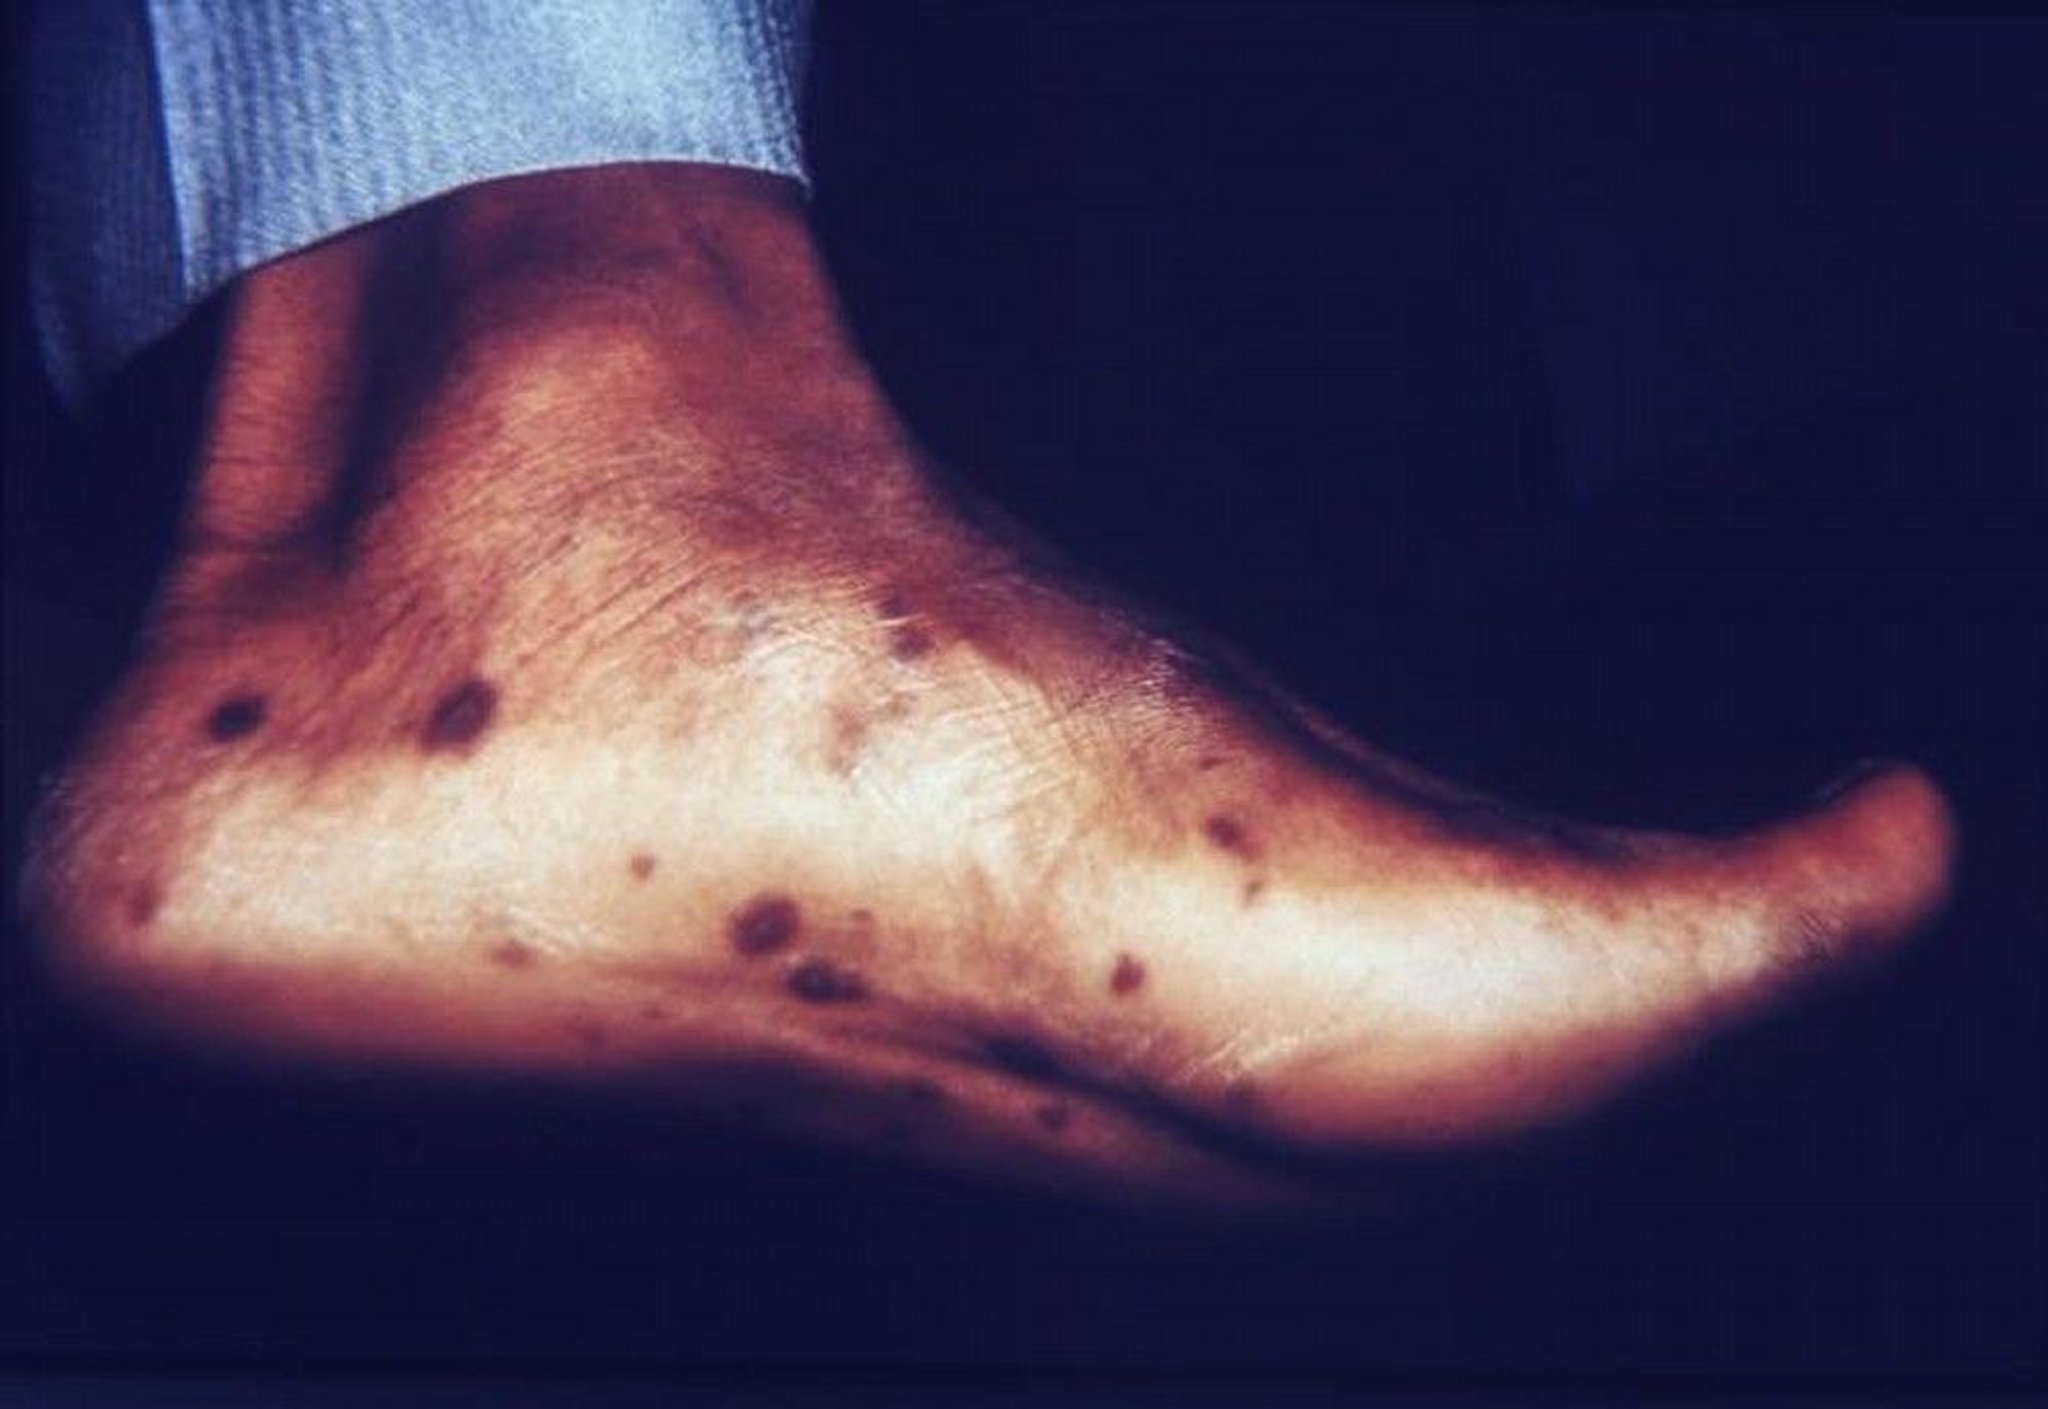 Syphilis—Secondary: Causing a Rash on the Soles